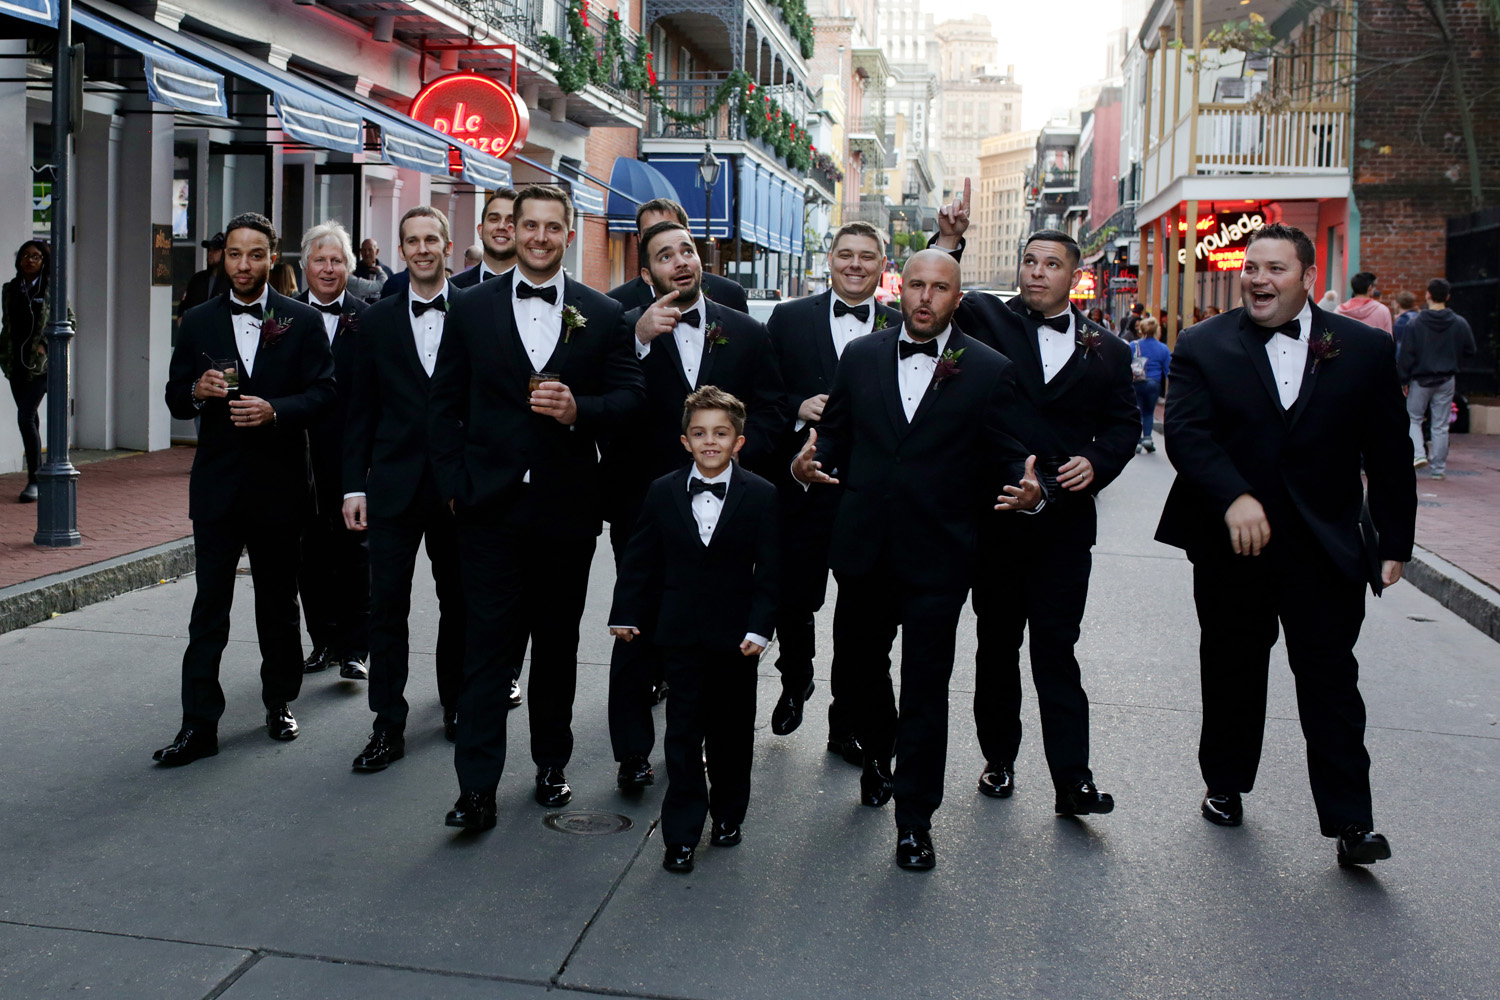 David and his groomsmen took to Bourbon Street before the wedding for some casual, fun portraits.